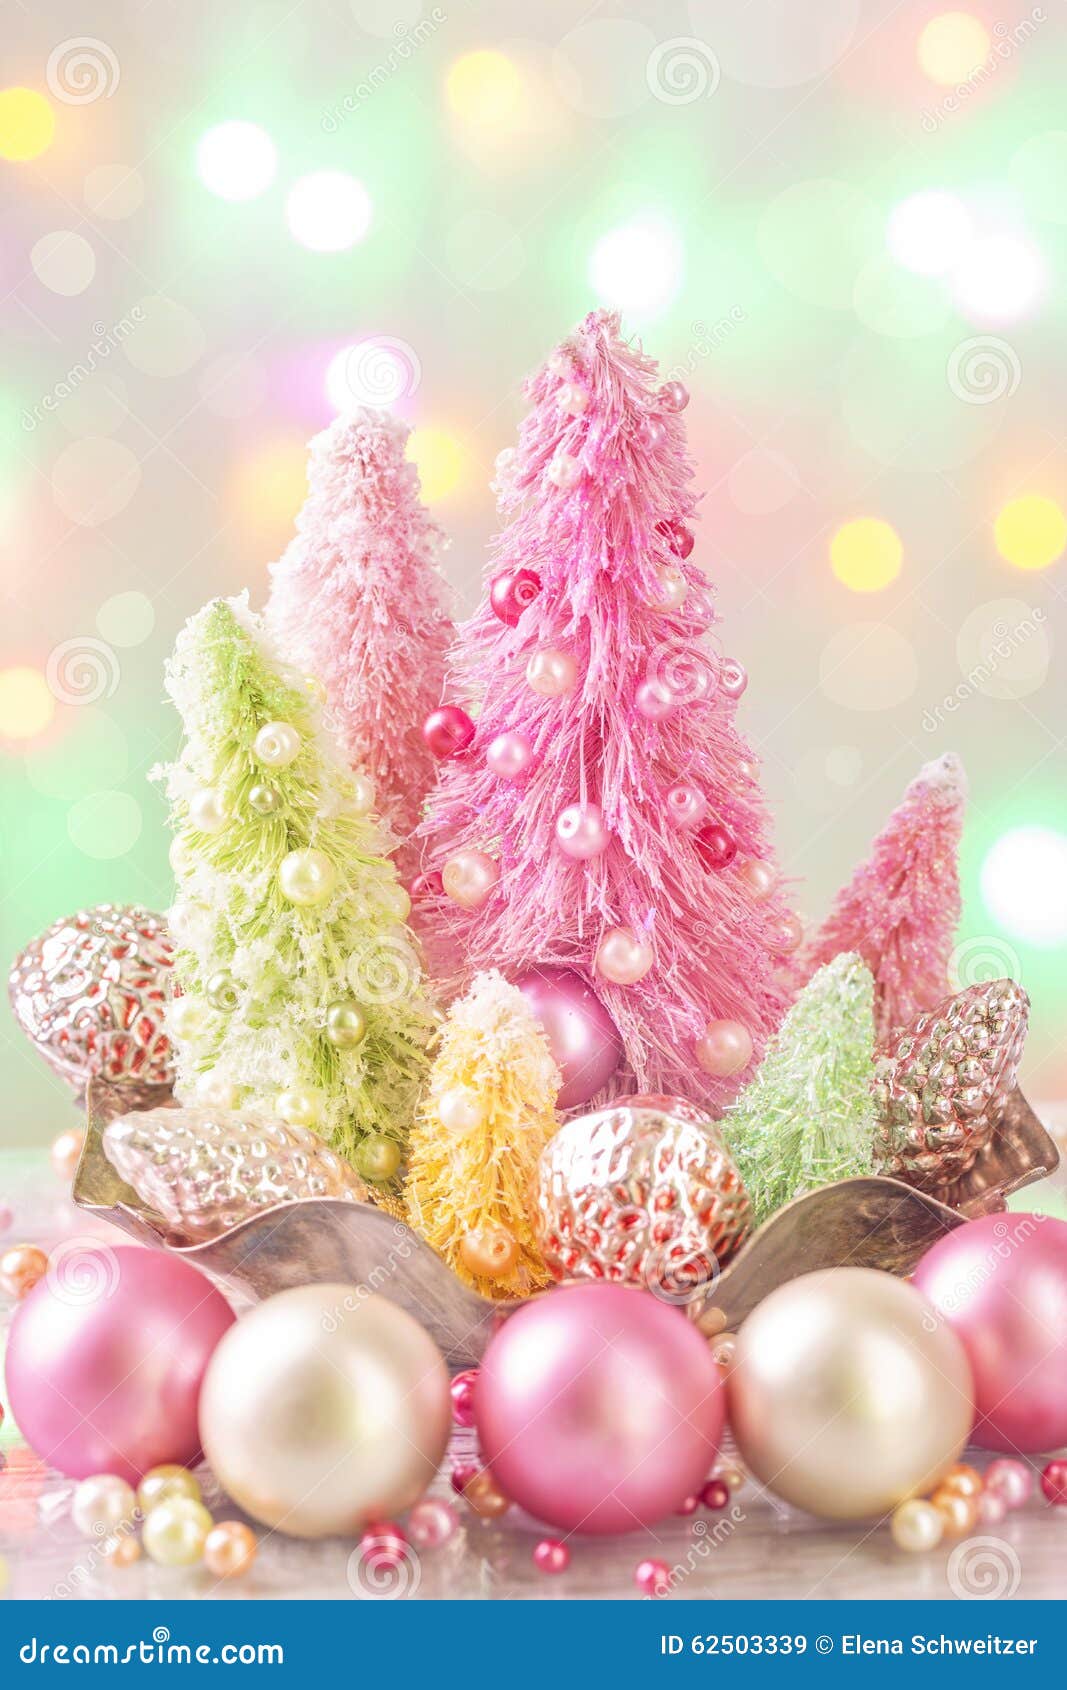 pastel colored christmas trees